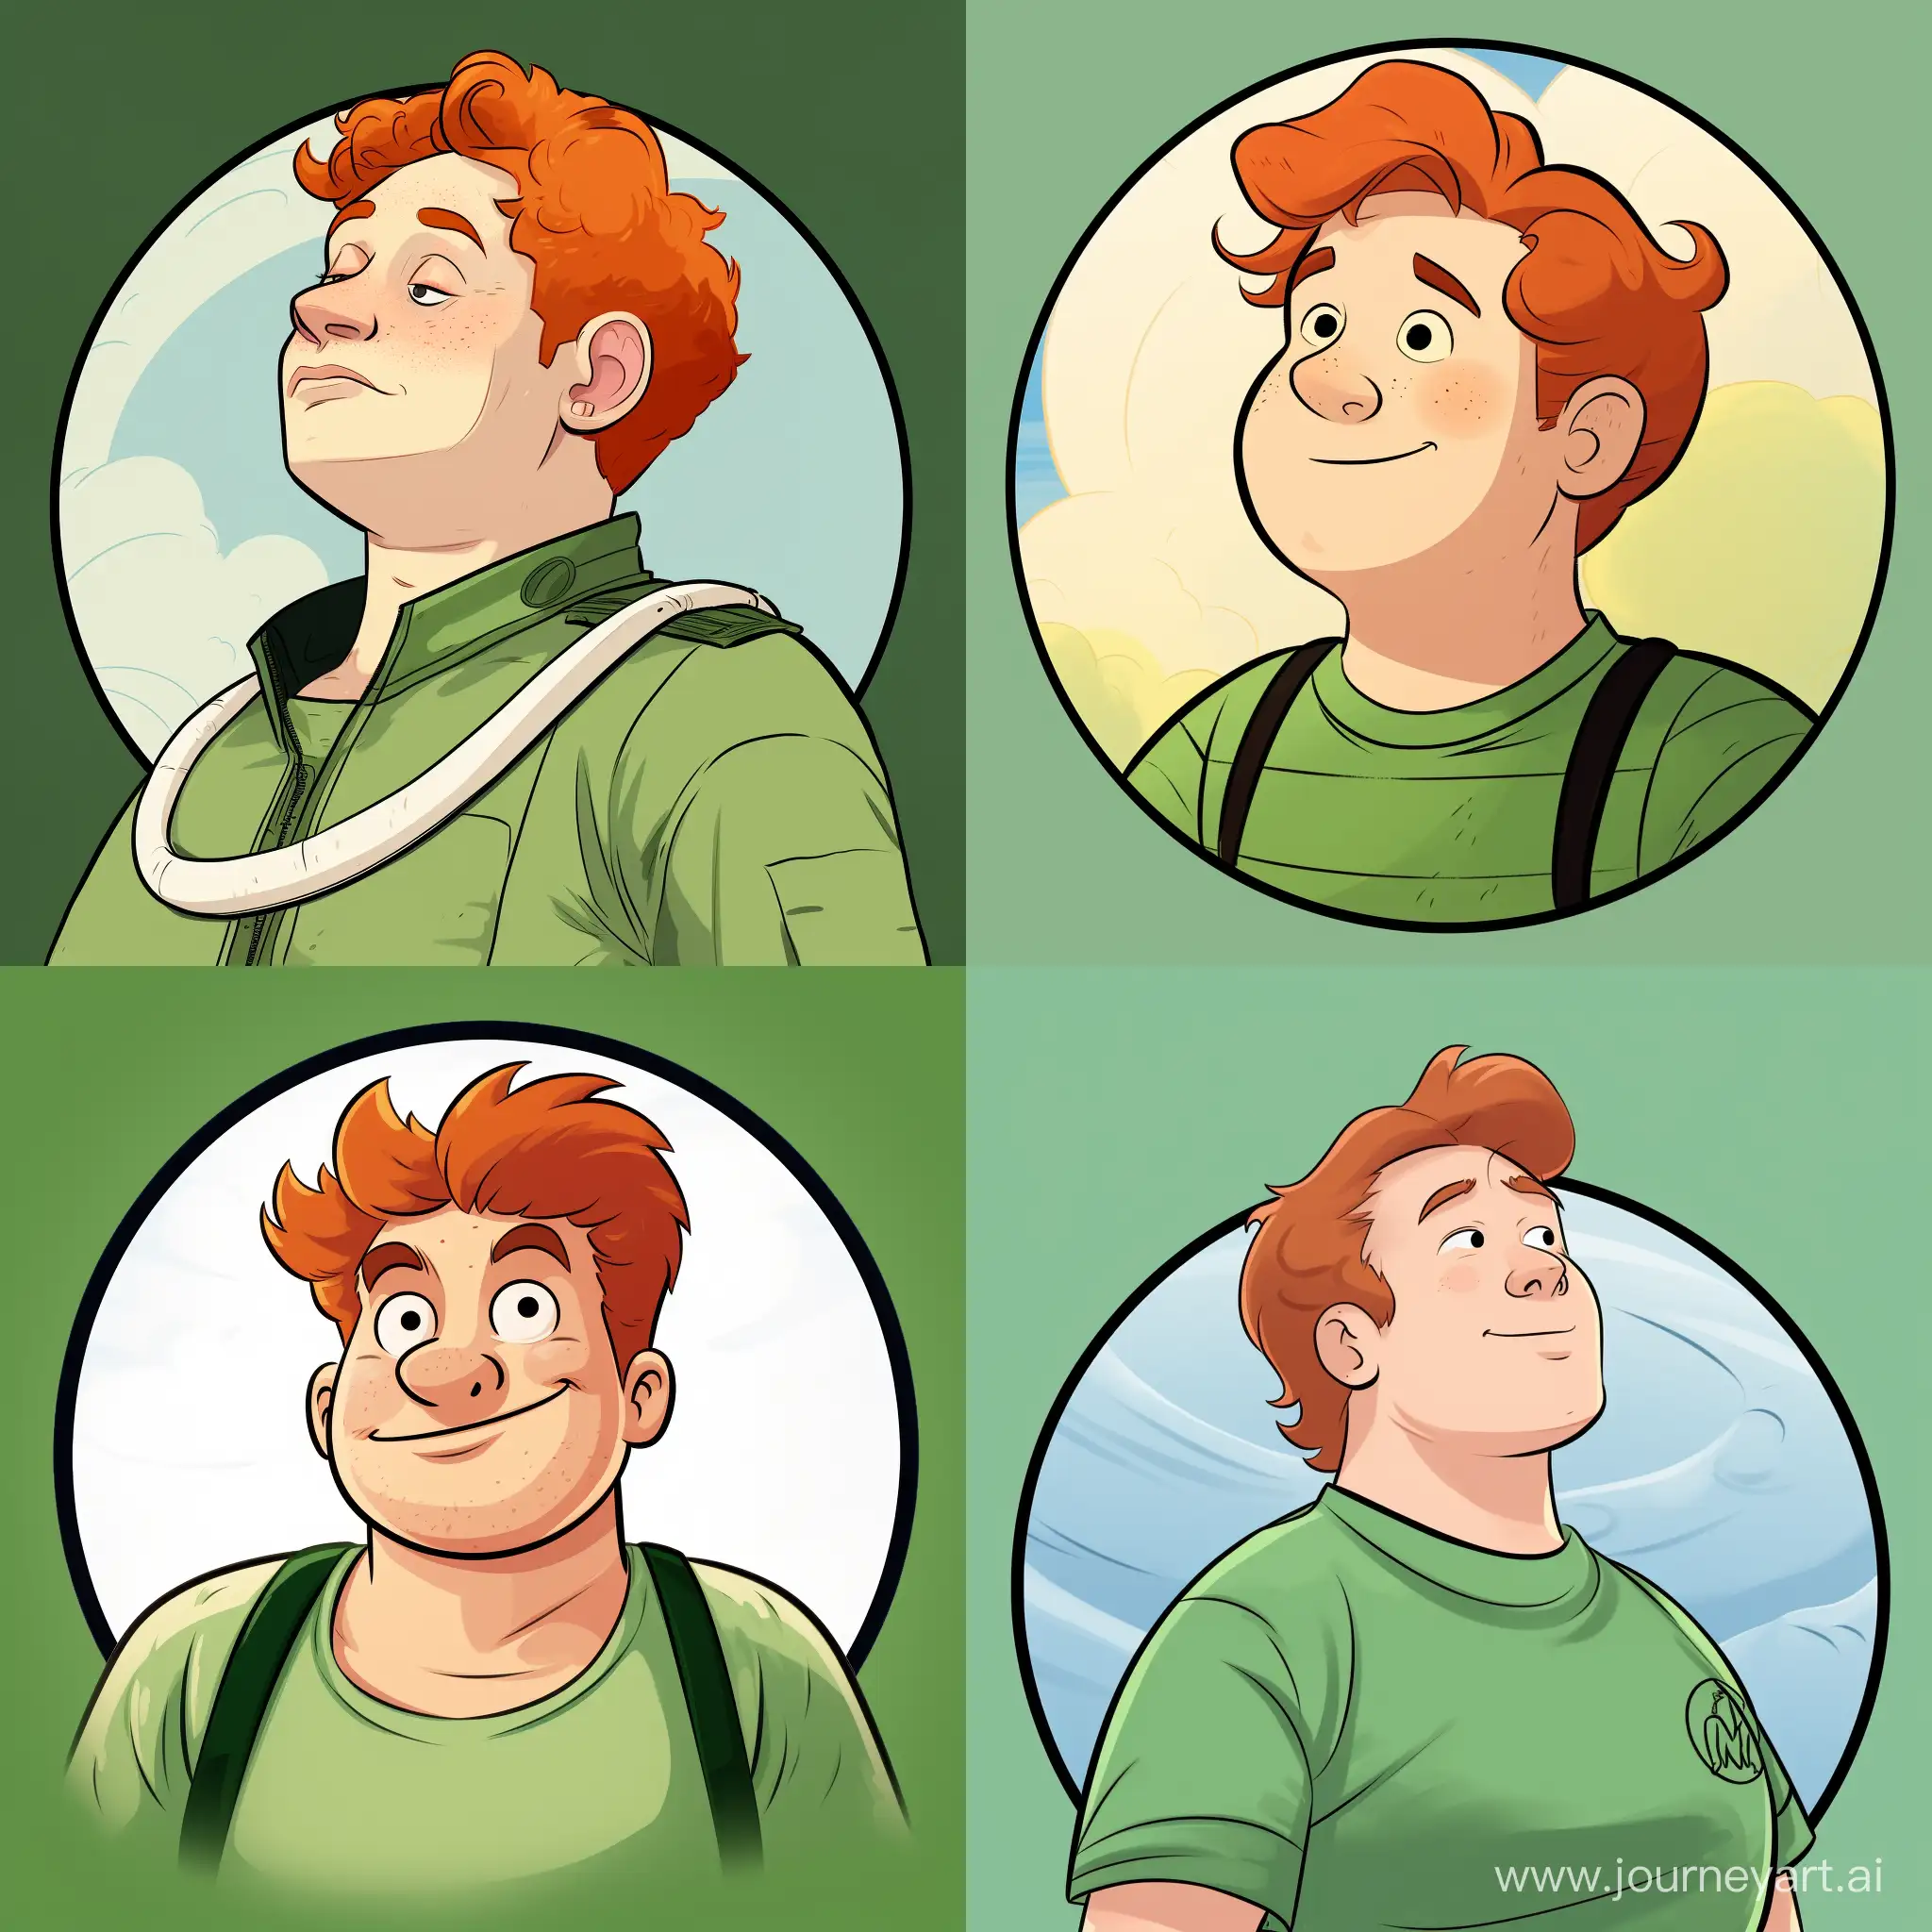 He is short and slightly overweight, under 25 years old, and has a beautiful nose. He has red disheveled hair and a big round nose. He calls himself a "moderately well-fed man in the prime of life". He wears a green T-shirt and a white jumpsuit with a strap with a button instead of a button that launches a propeller that is attached to his back.detailed processing photo the reality of the small details of the foreground photo taken with a Nikon Z 9 camera